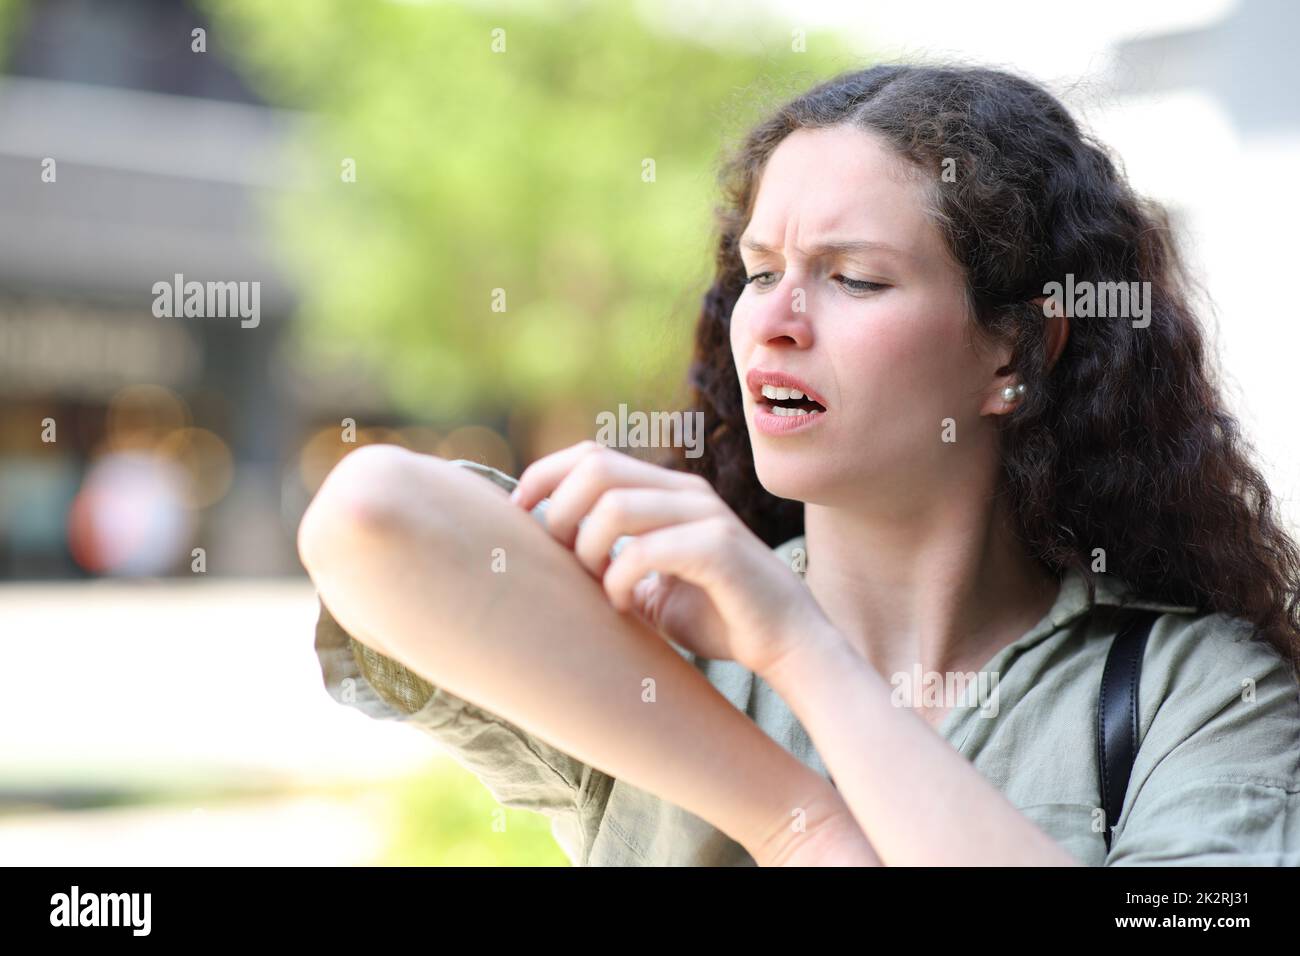 Stressed woman scratching arm in the street Stock Photo